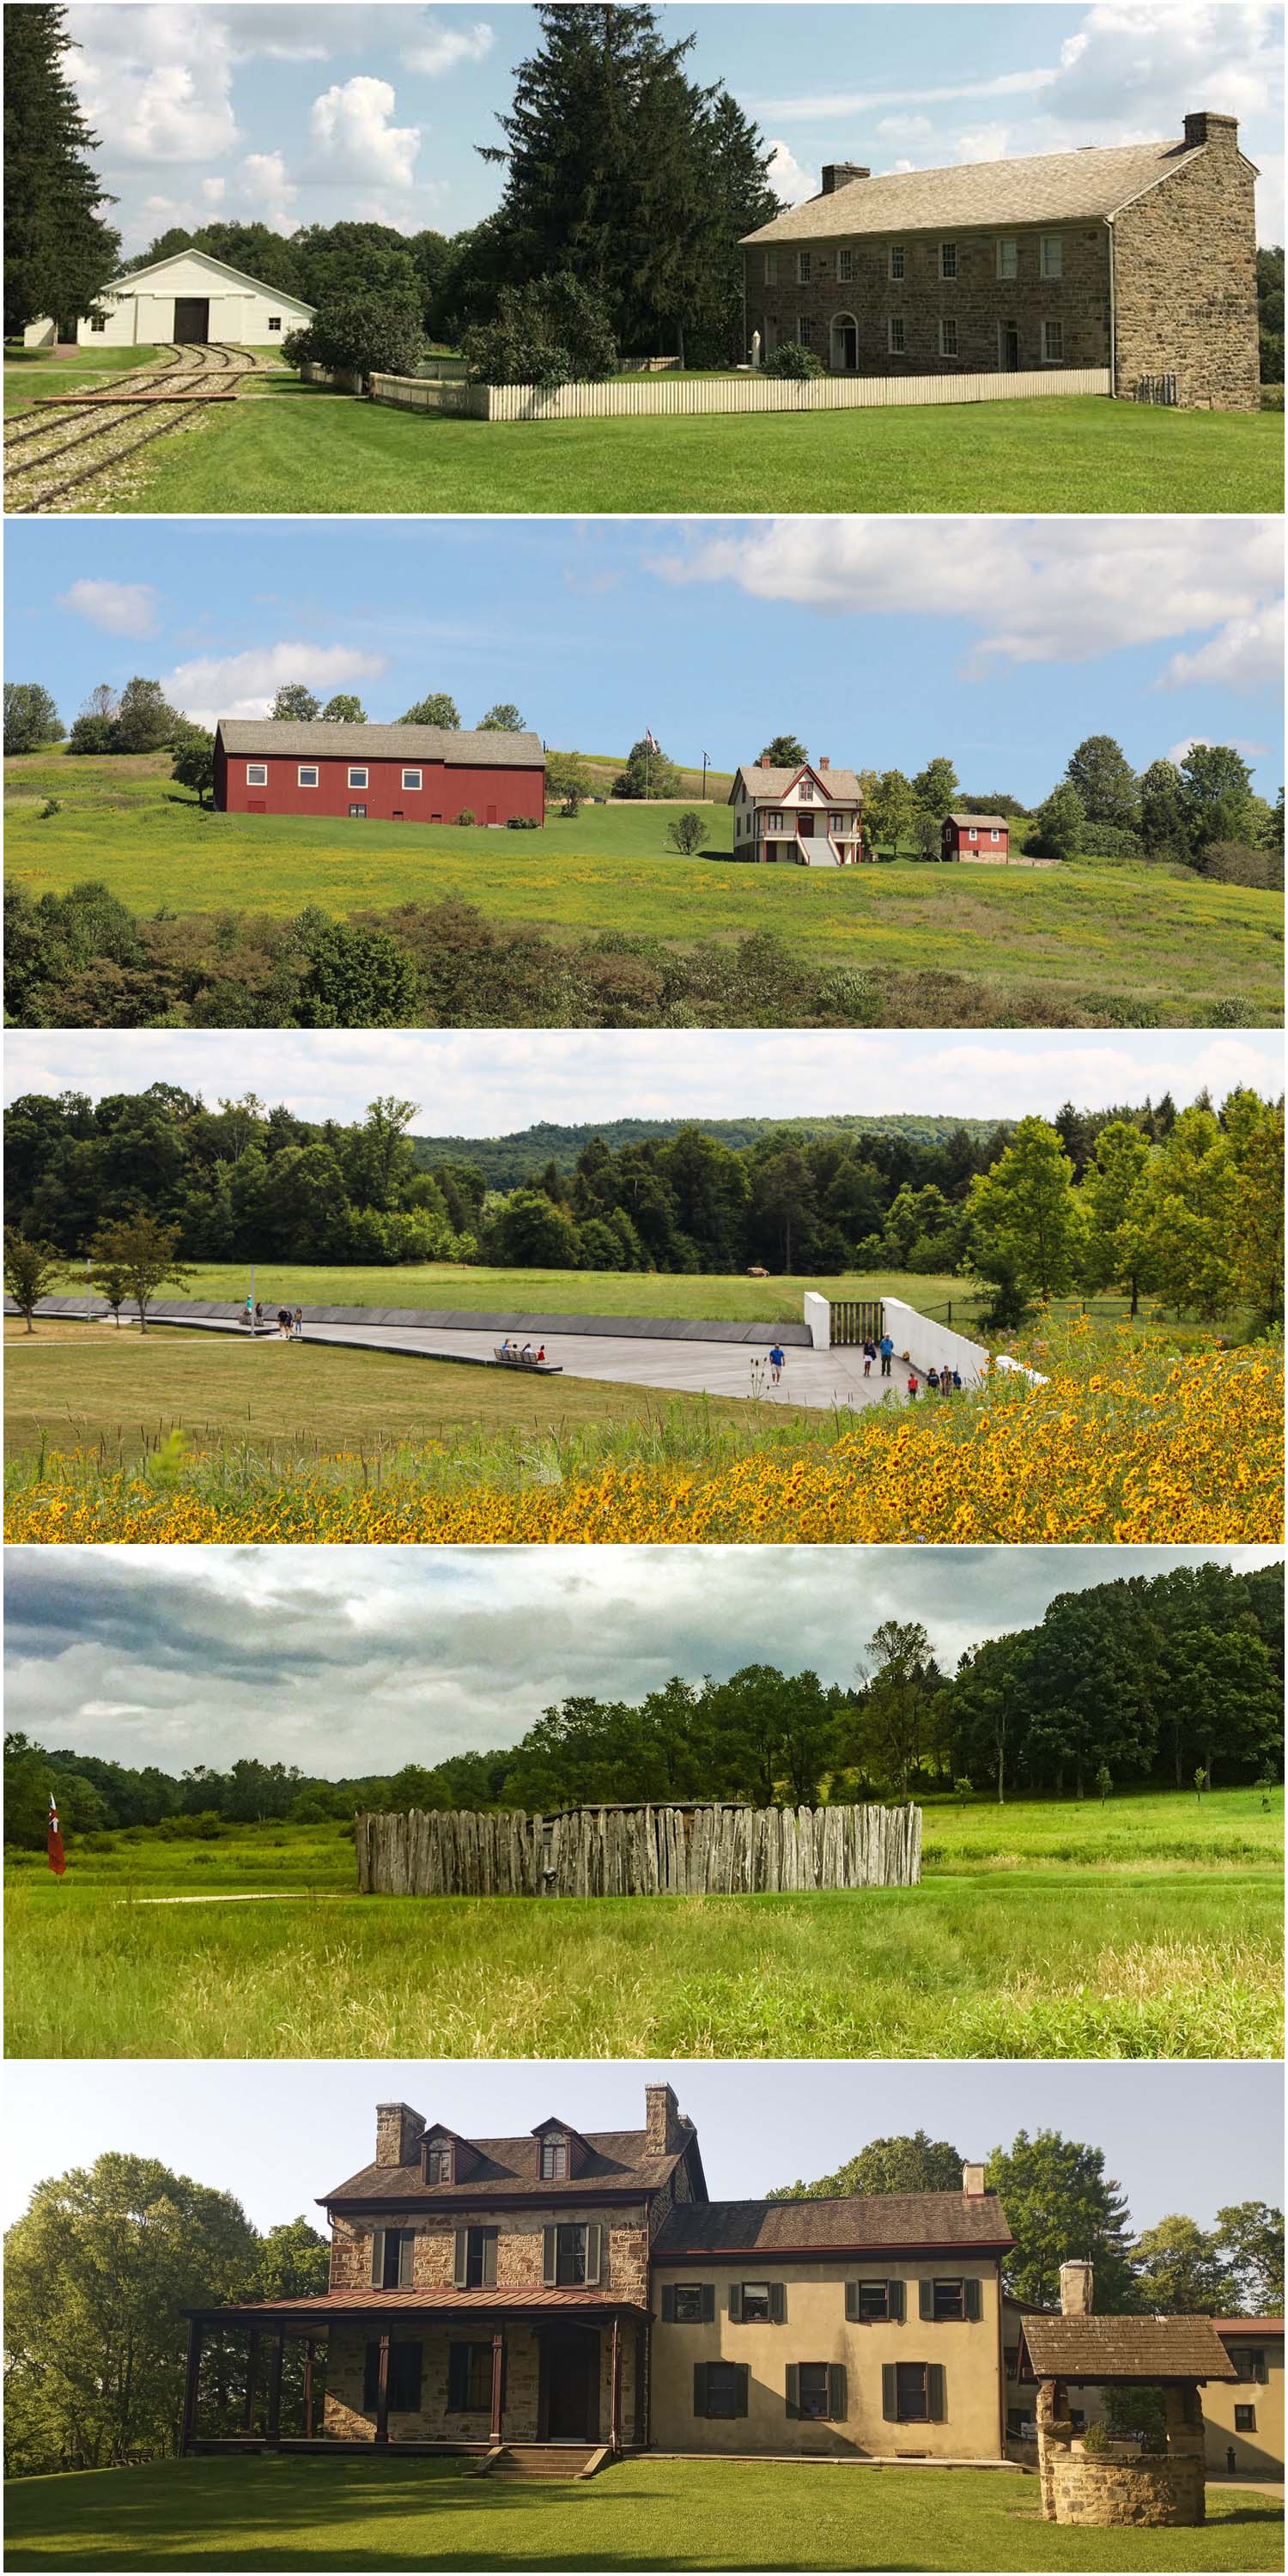 A scene from the 5 National Parks of Western Pennsylvania. There is a stone tavern and an engine house building, a farmhouse and barn, a white granite wall with names, a fort, and a country home.